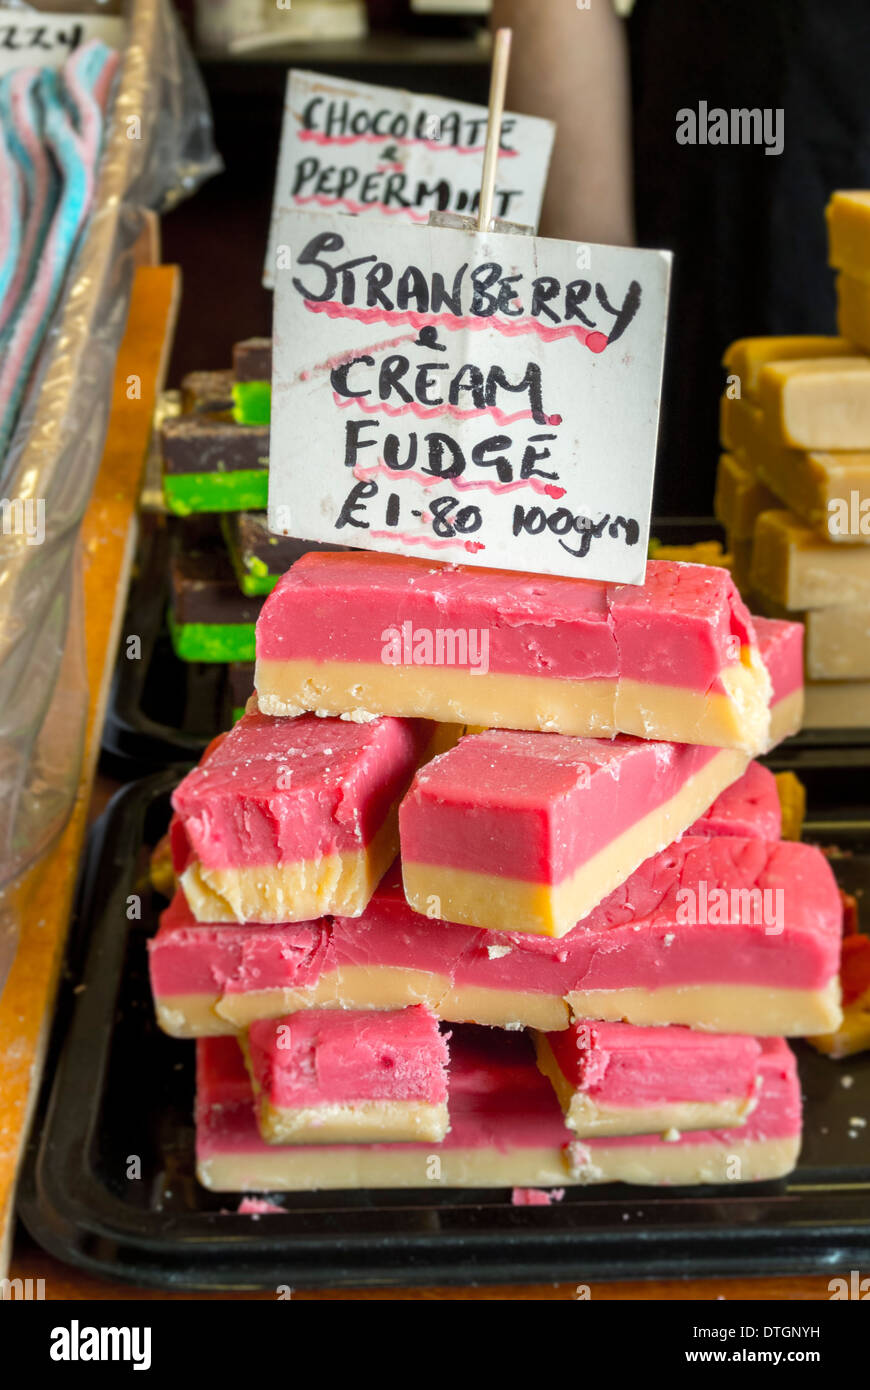 Strawberry cream fudge with sign in sweetshop Stock Photo